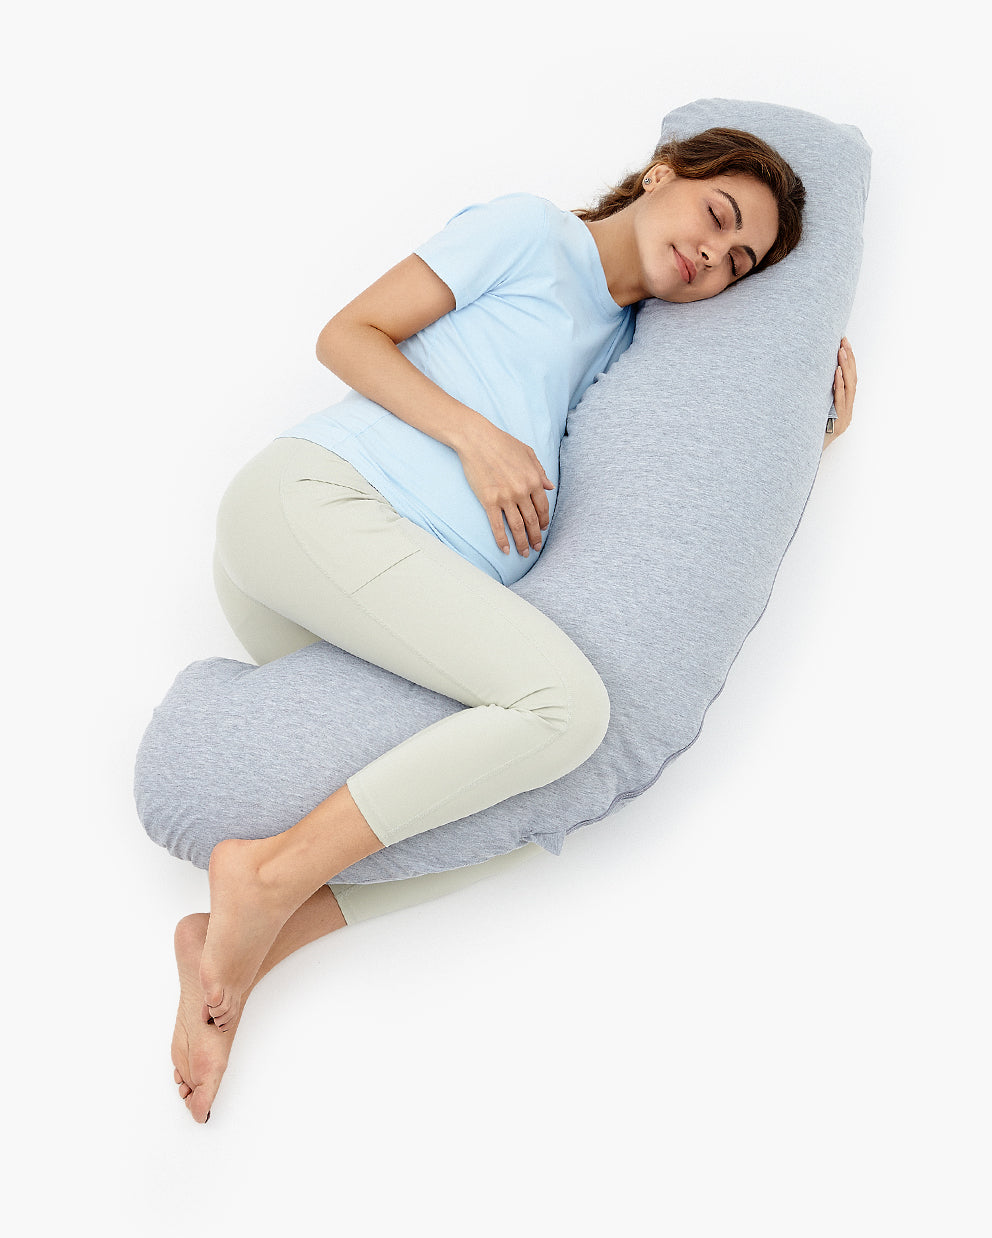  Chilling Home Pregnancy Pillows, U Shaped Full Body Maternity  Pillow 58 inch, Pregnant Women Must Haves Pregnancy Pillows for Sleeping  with Removable Cover : Baby